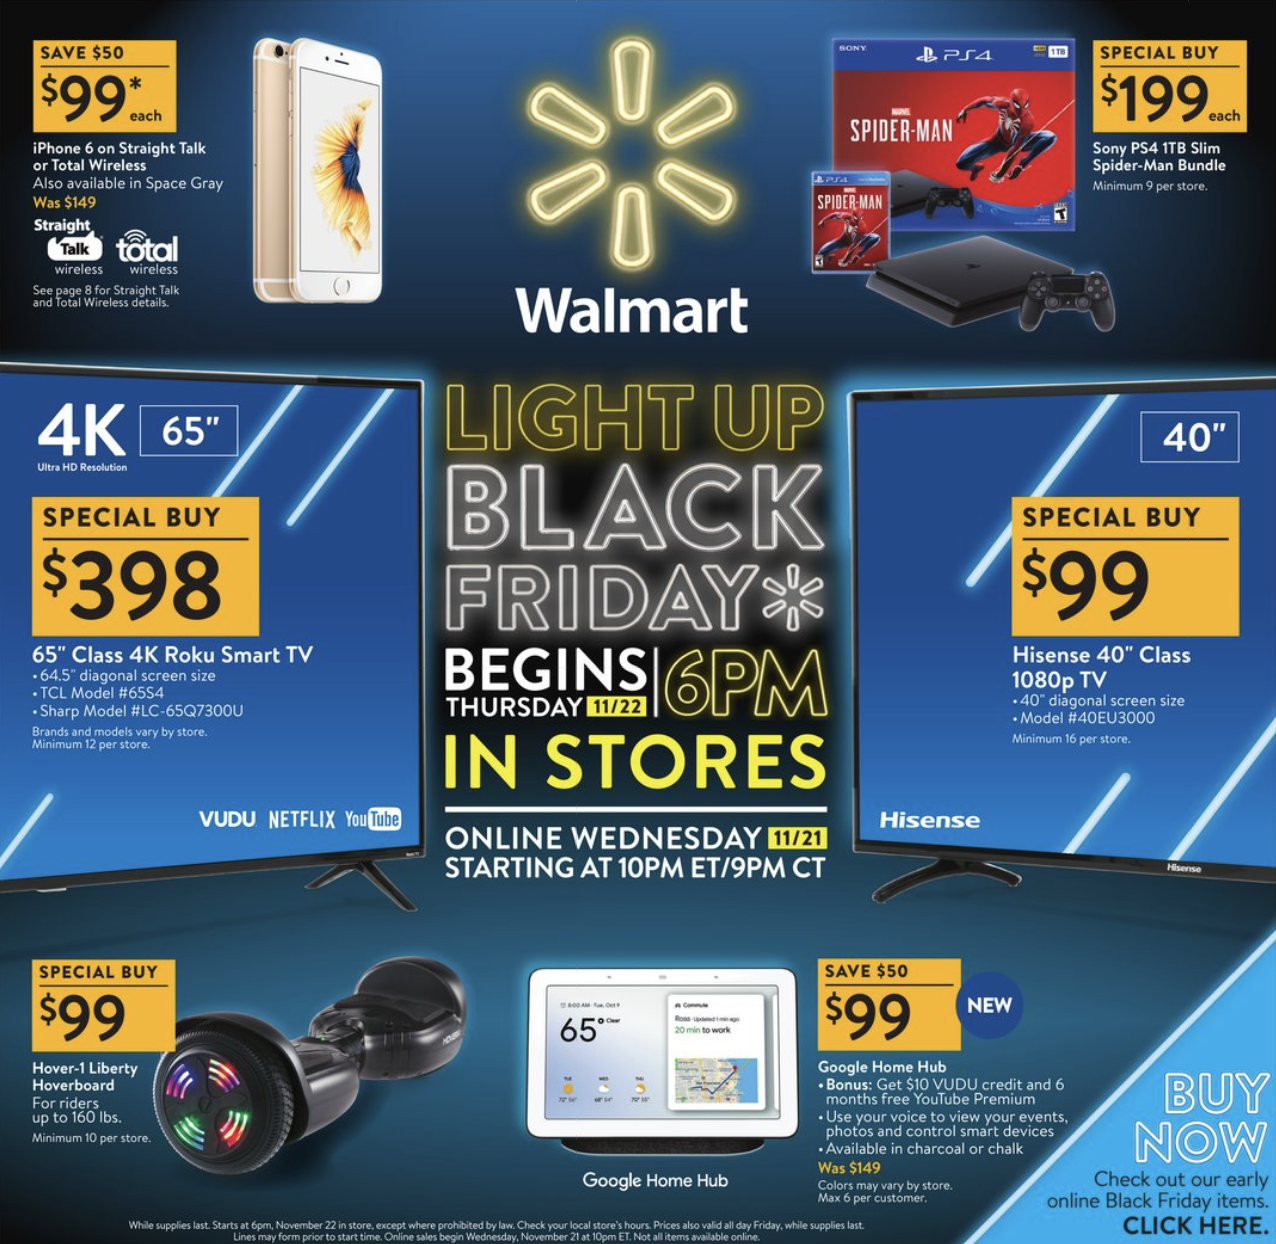 The Best Deals From the 2018 Walmart Black Friday Ad - What Time Are Black Friday Deals At Walmart